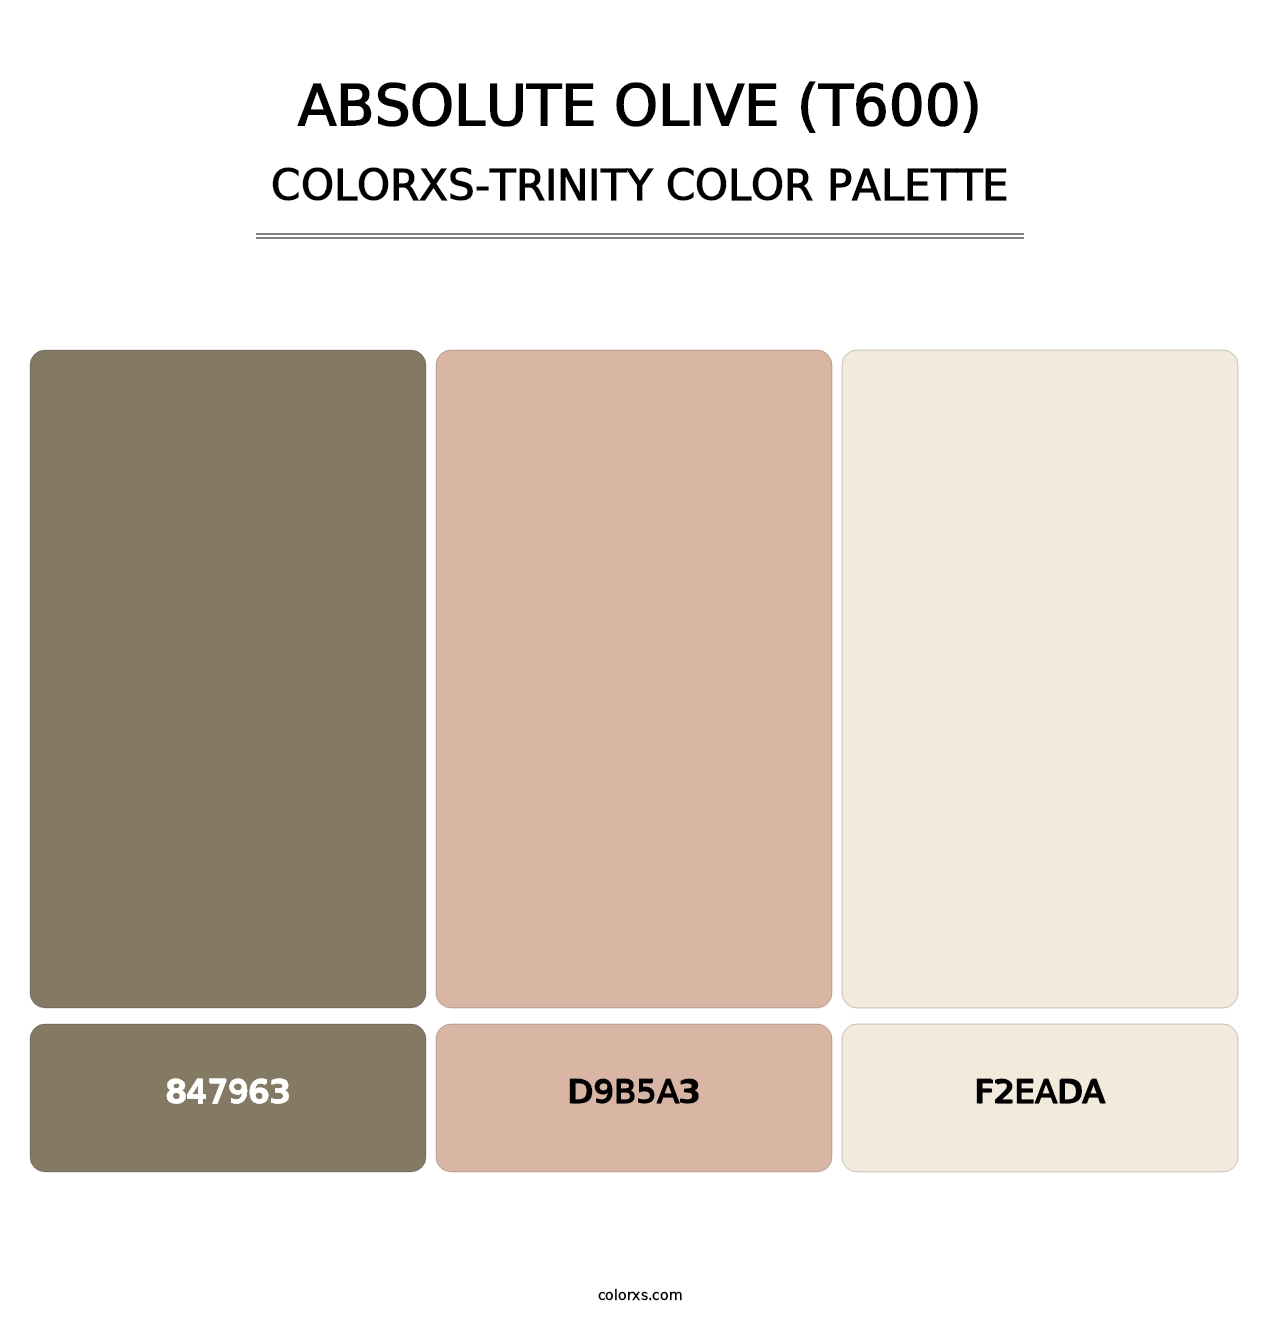 Absolute Olive (T600) - Colorxs Trinity Palette